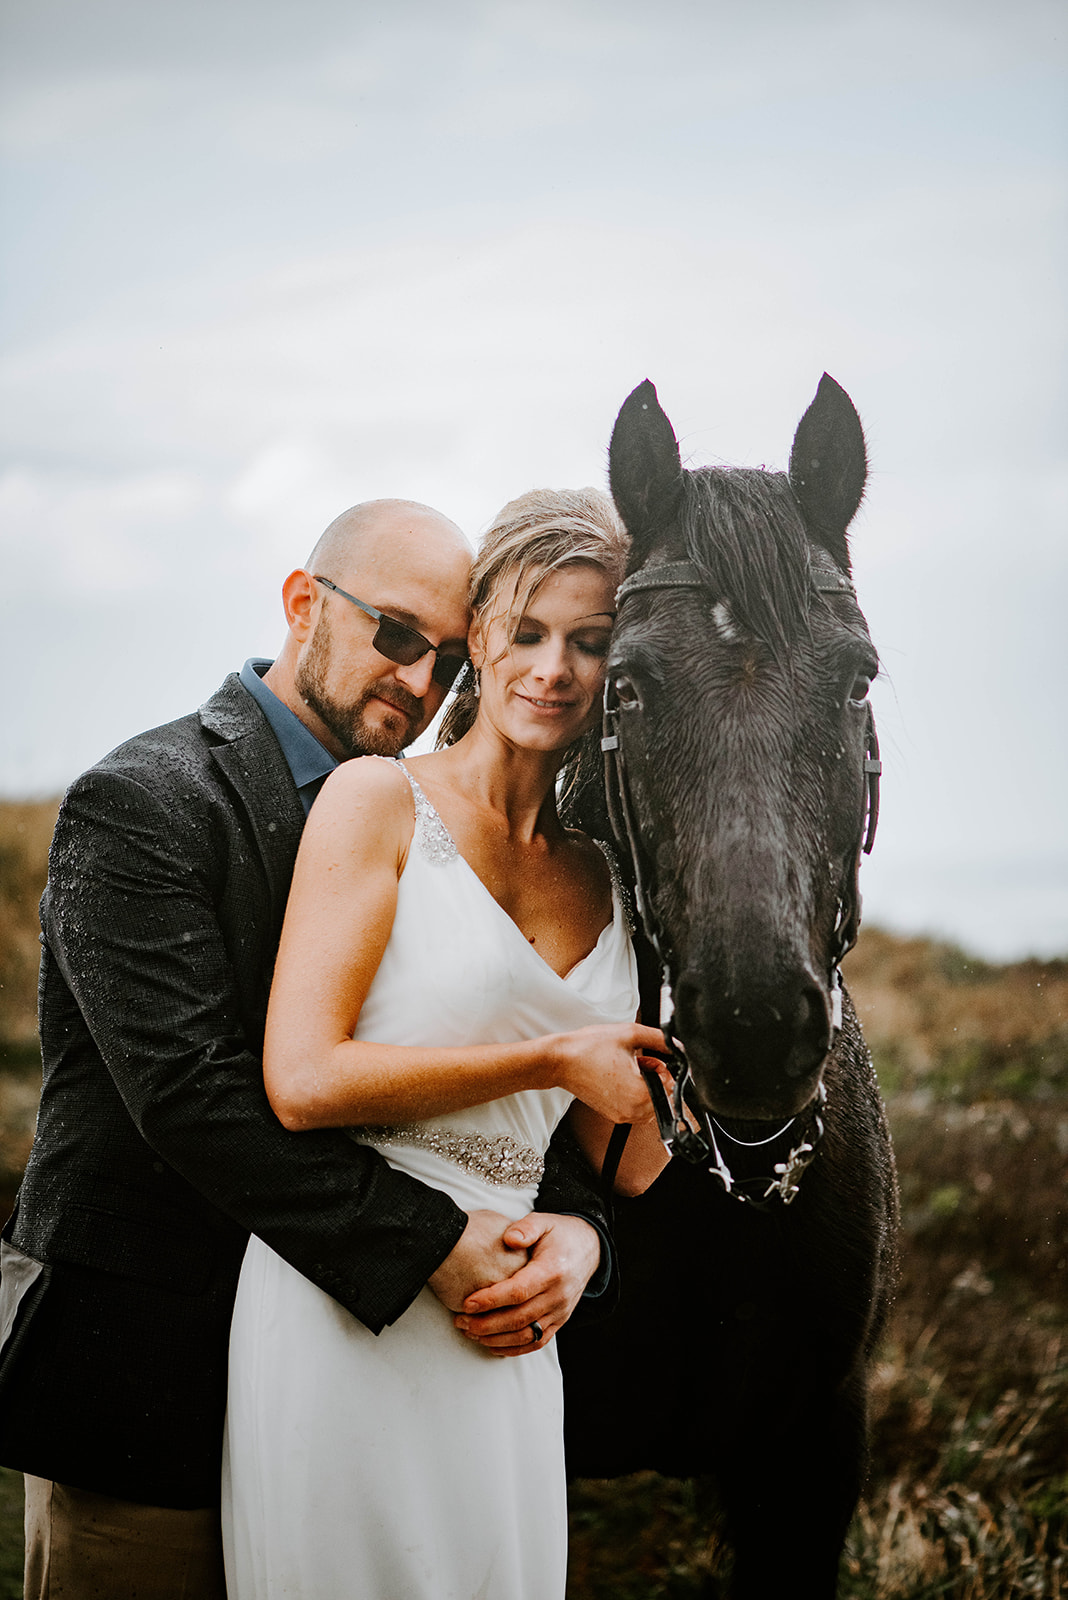 A bride leaning on her black horse in the rain while the groom hugs her from behind.